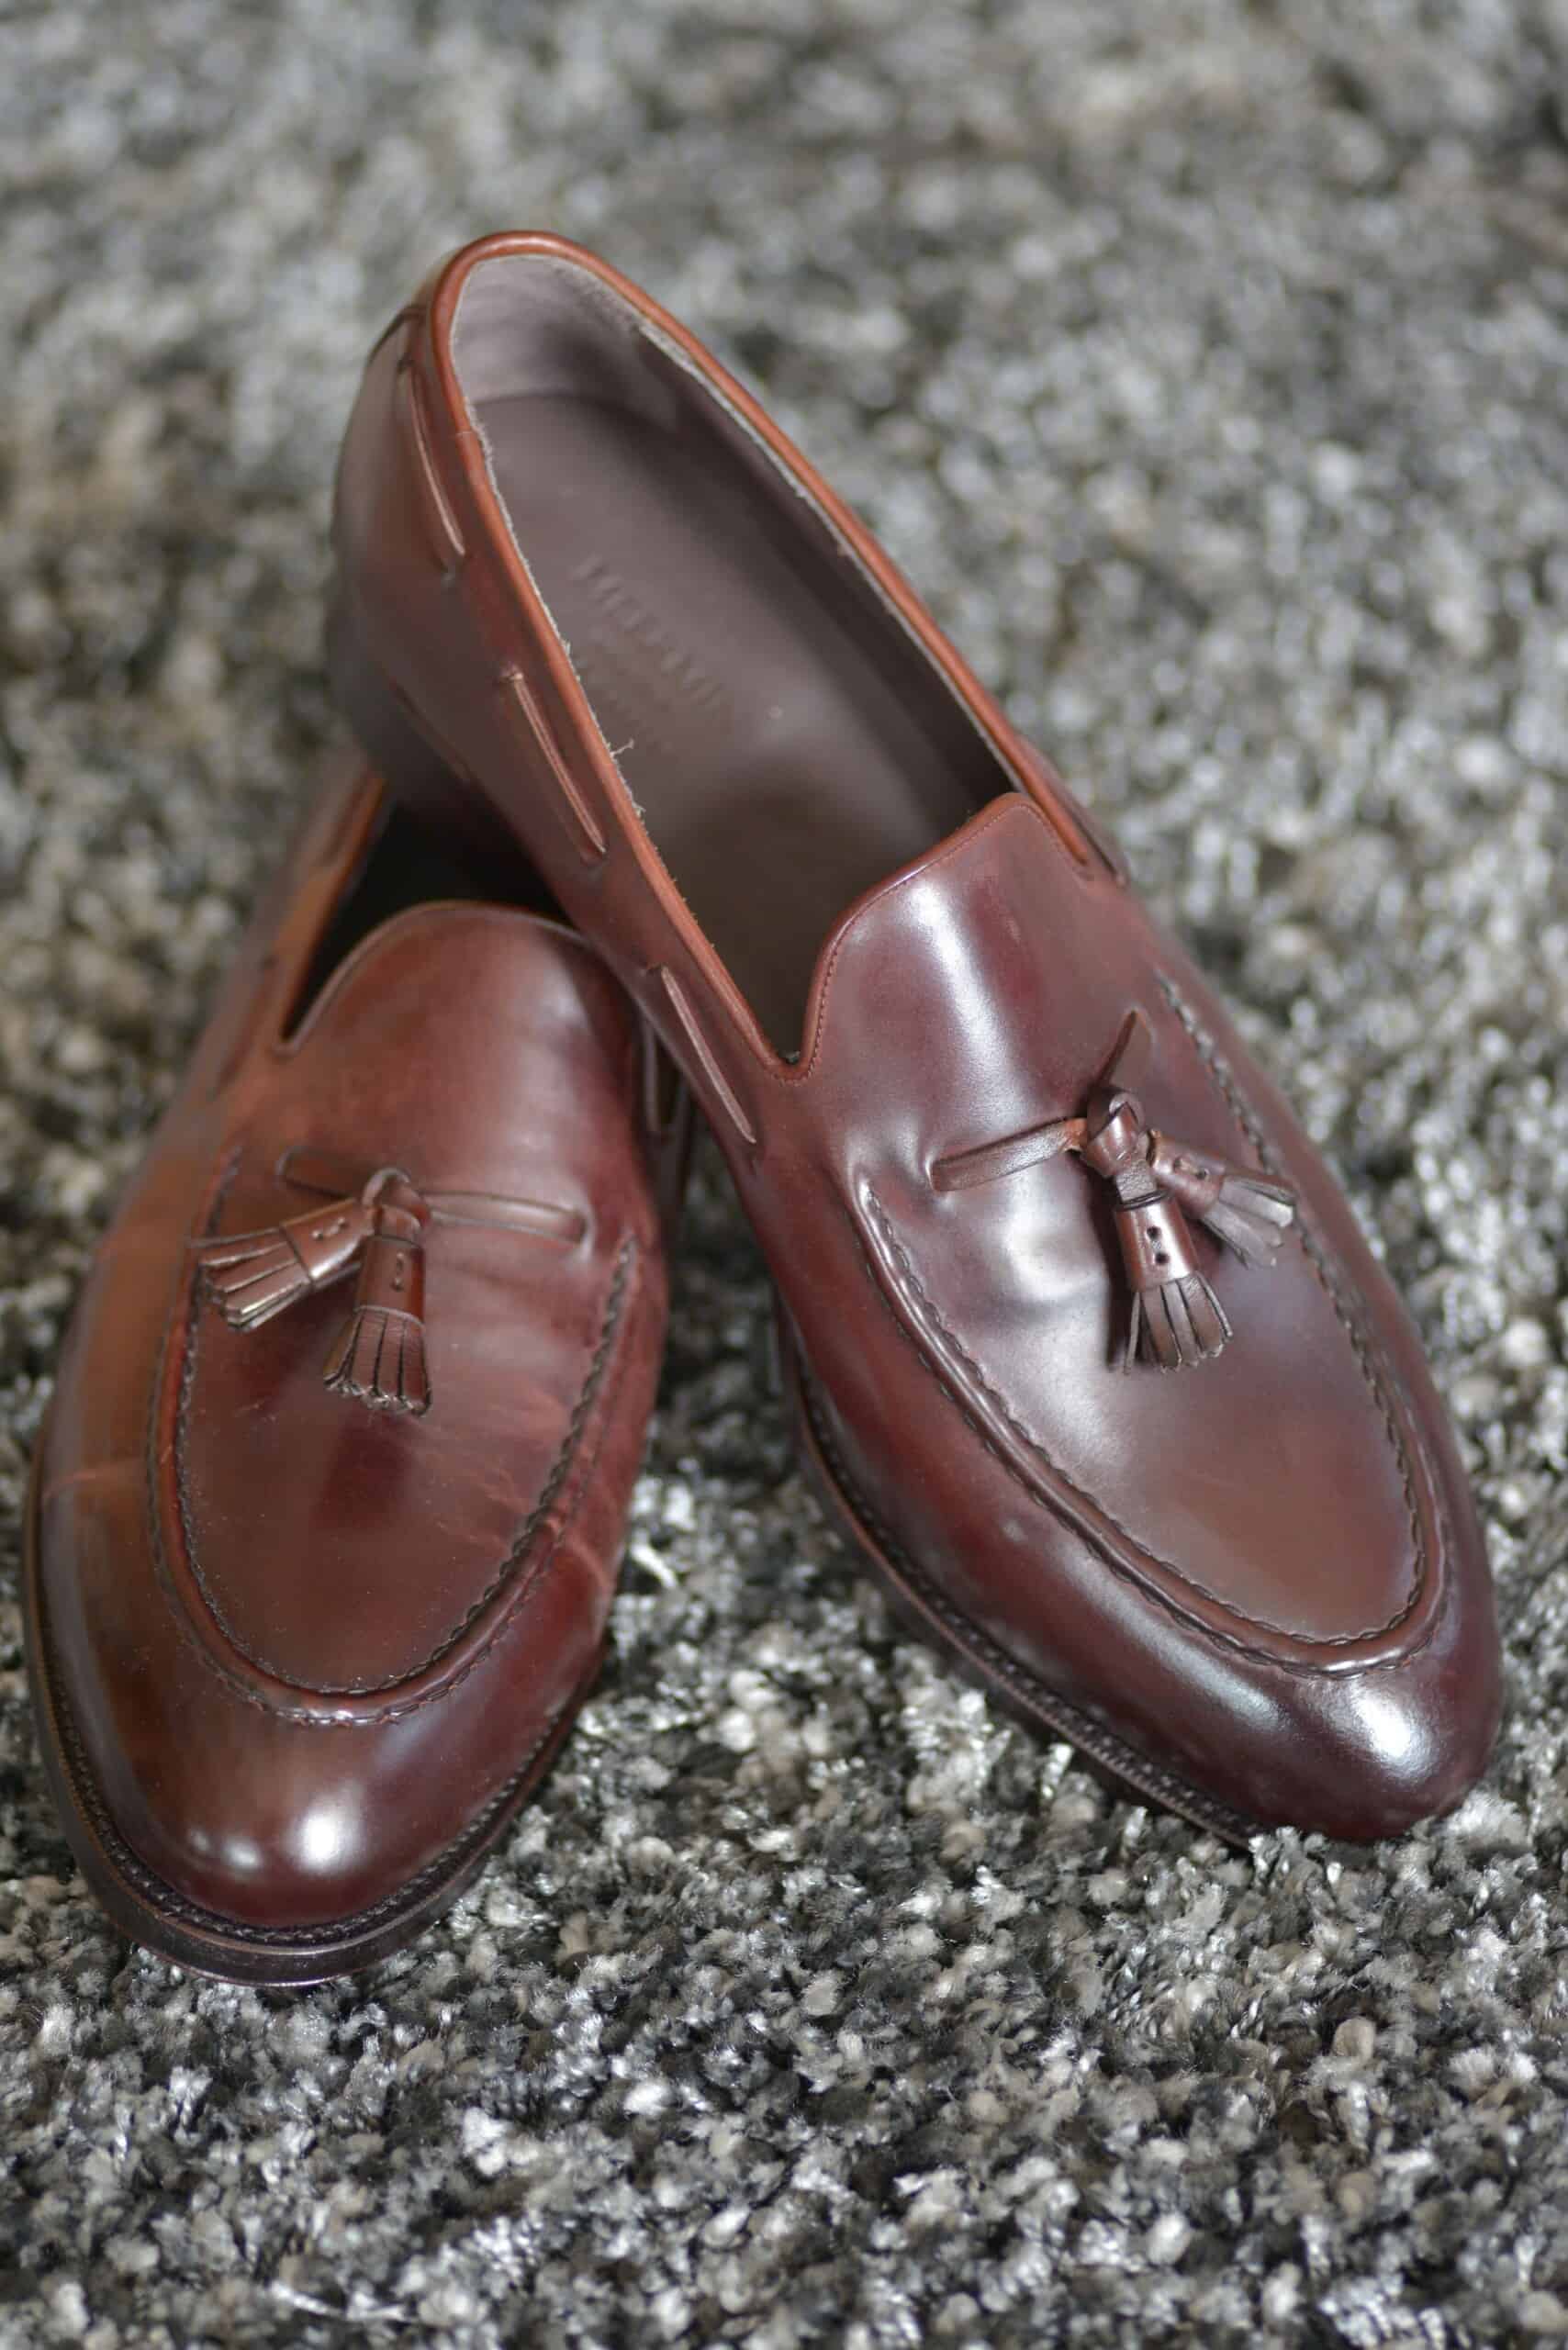 A pair of Classic Cordovan colored tassel loafers from Meermin